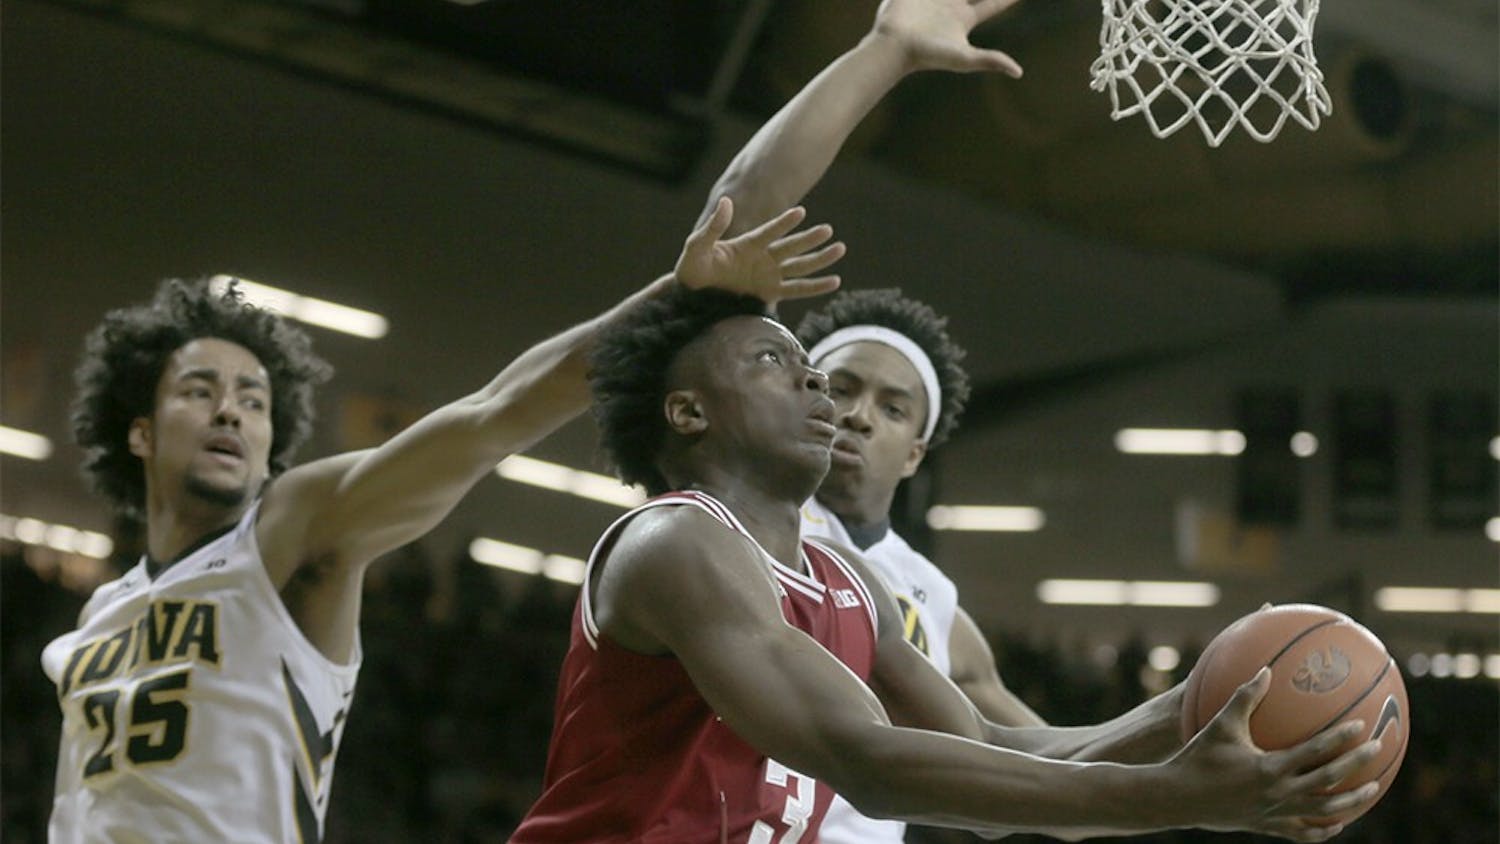 Freshman forward OG Anunoby attemps a layup against two Iowa defenders in IU's Tuesday win. (The Daily Iowan)